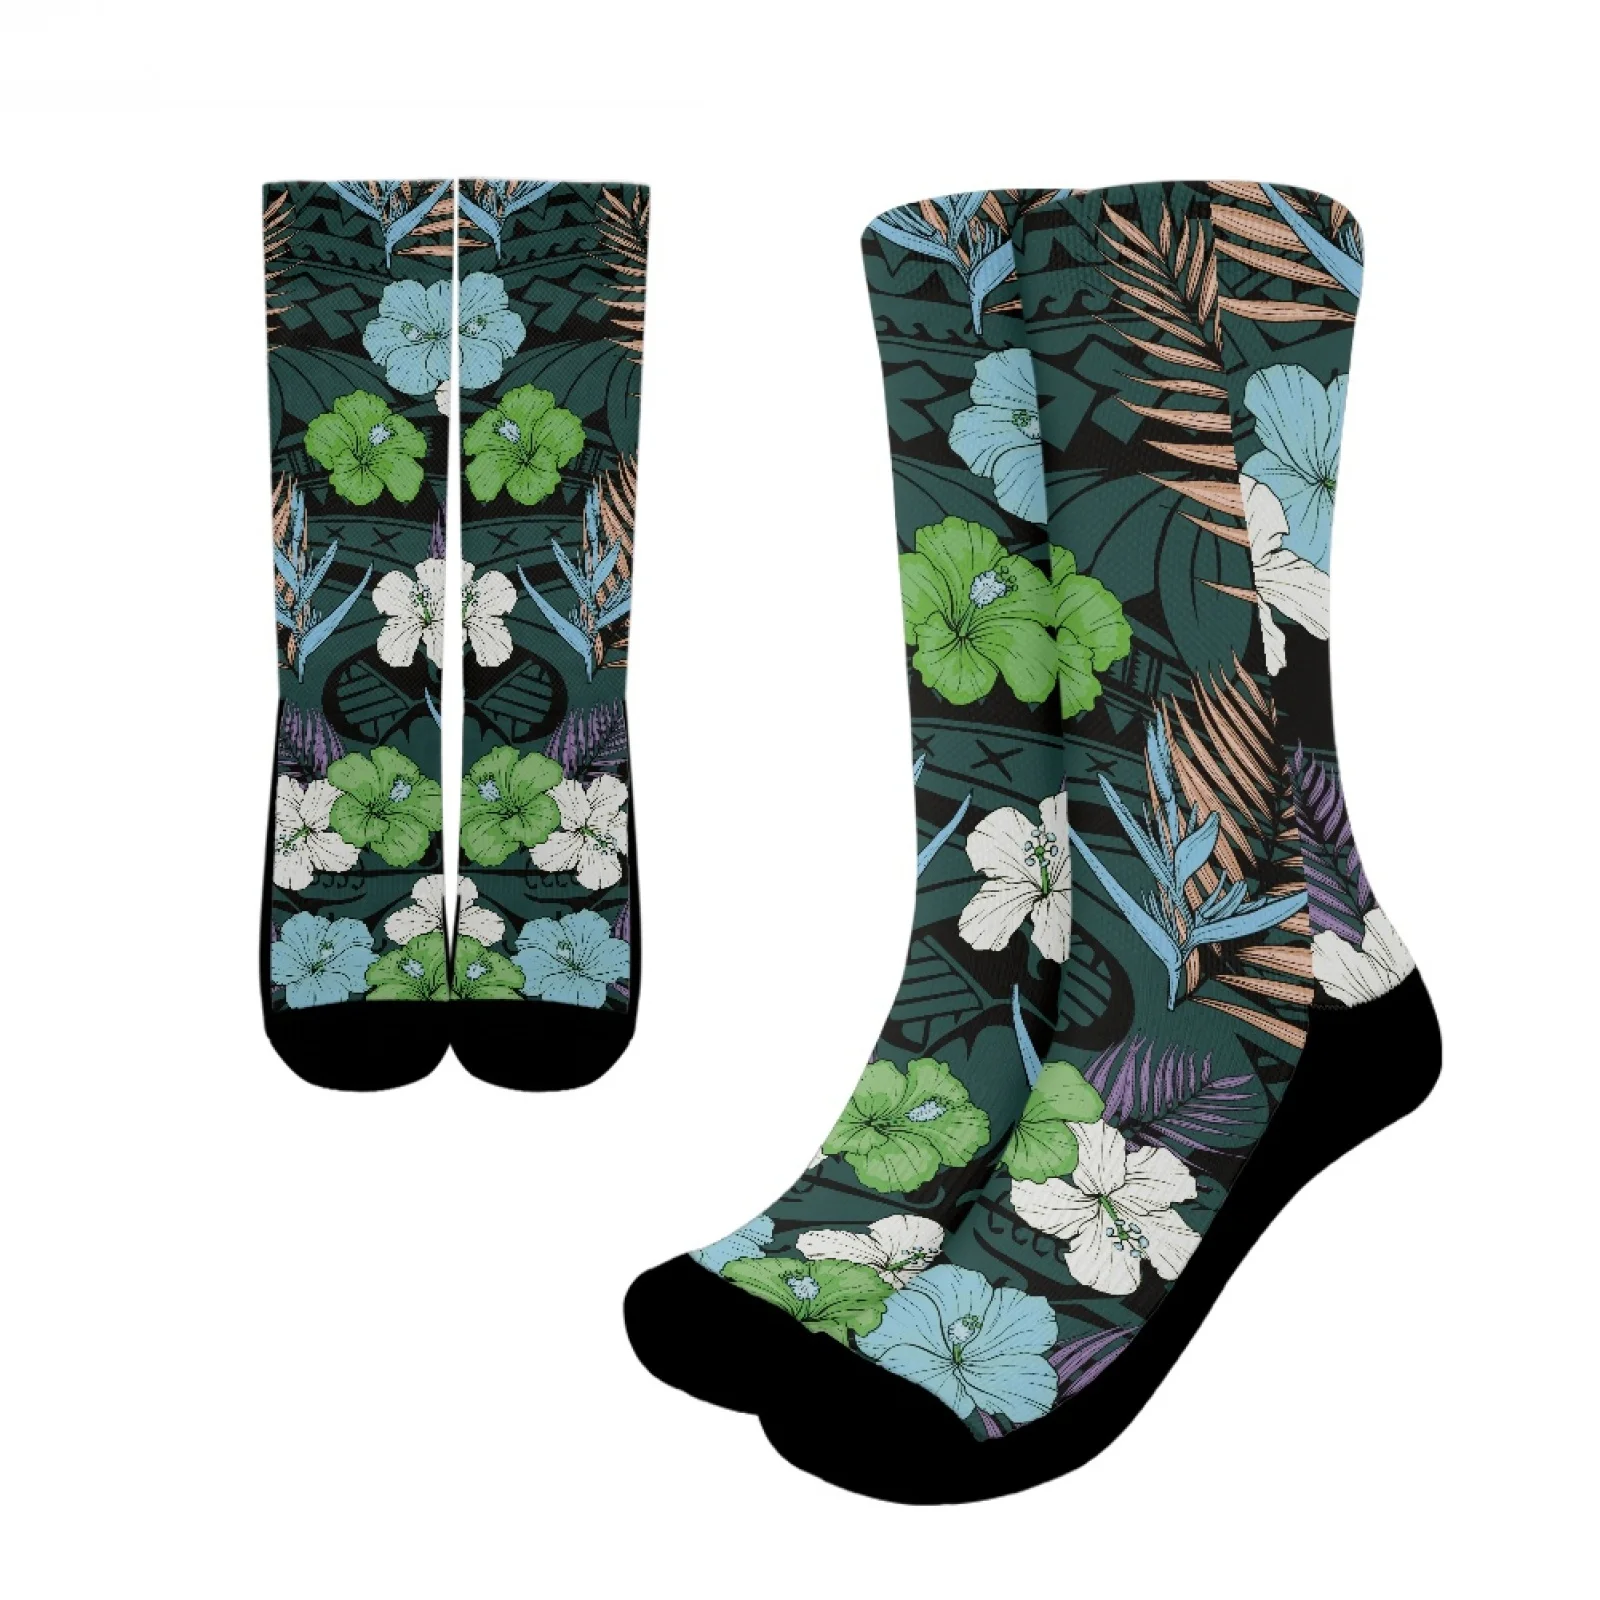 

Polynesian Tribal Samoan Totem Tattoo Samoa Prints Skin-Friendly And Breathable Hibiscus Sports Sock Fit Give Elder Holiday Gift